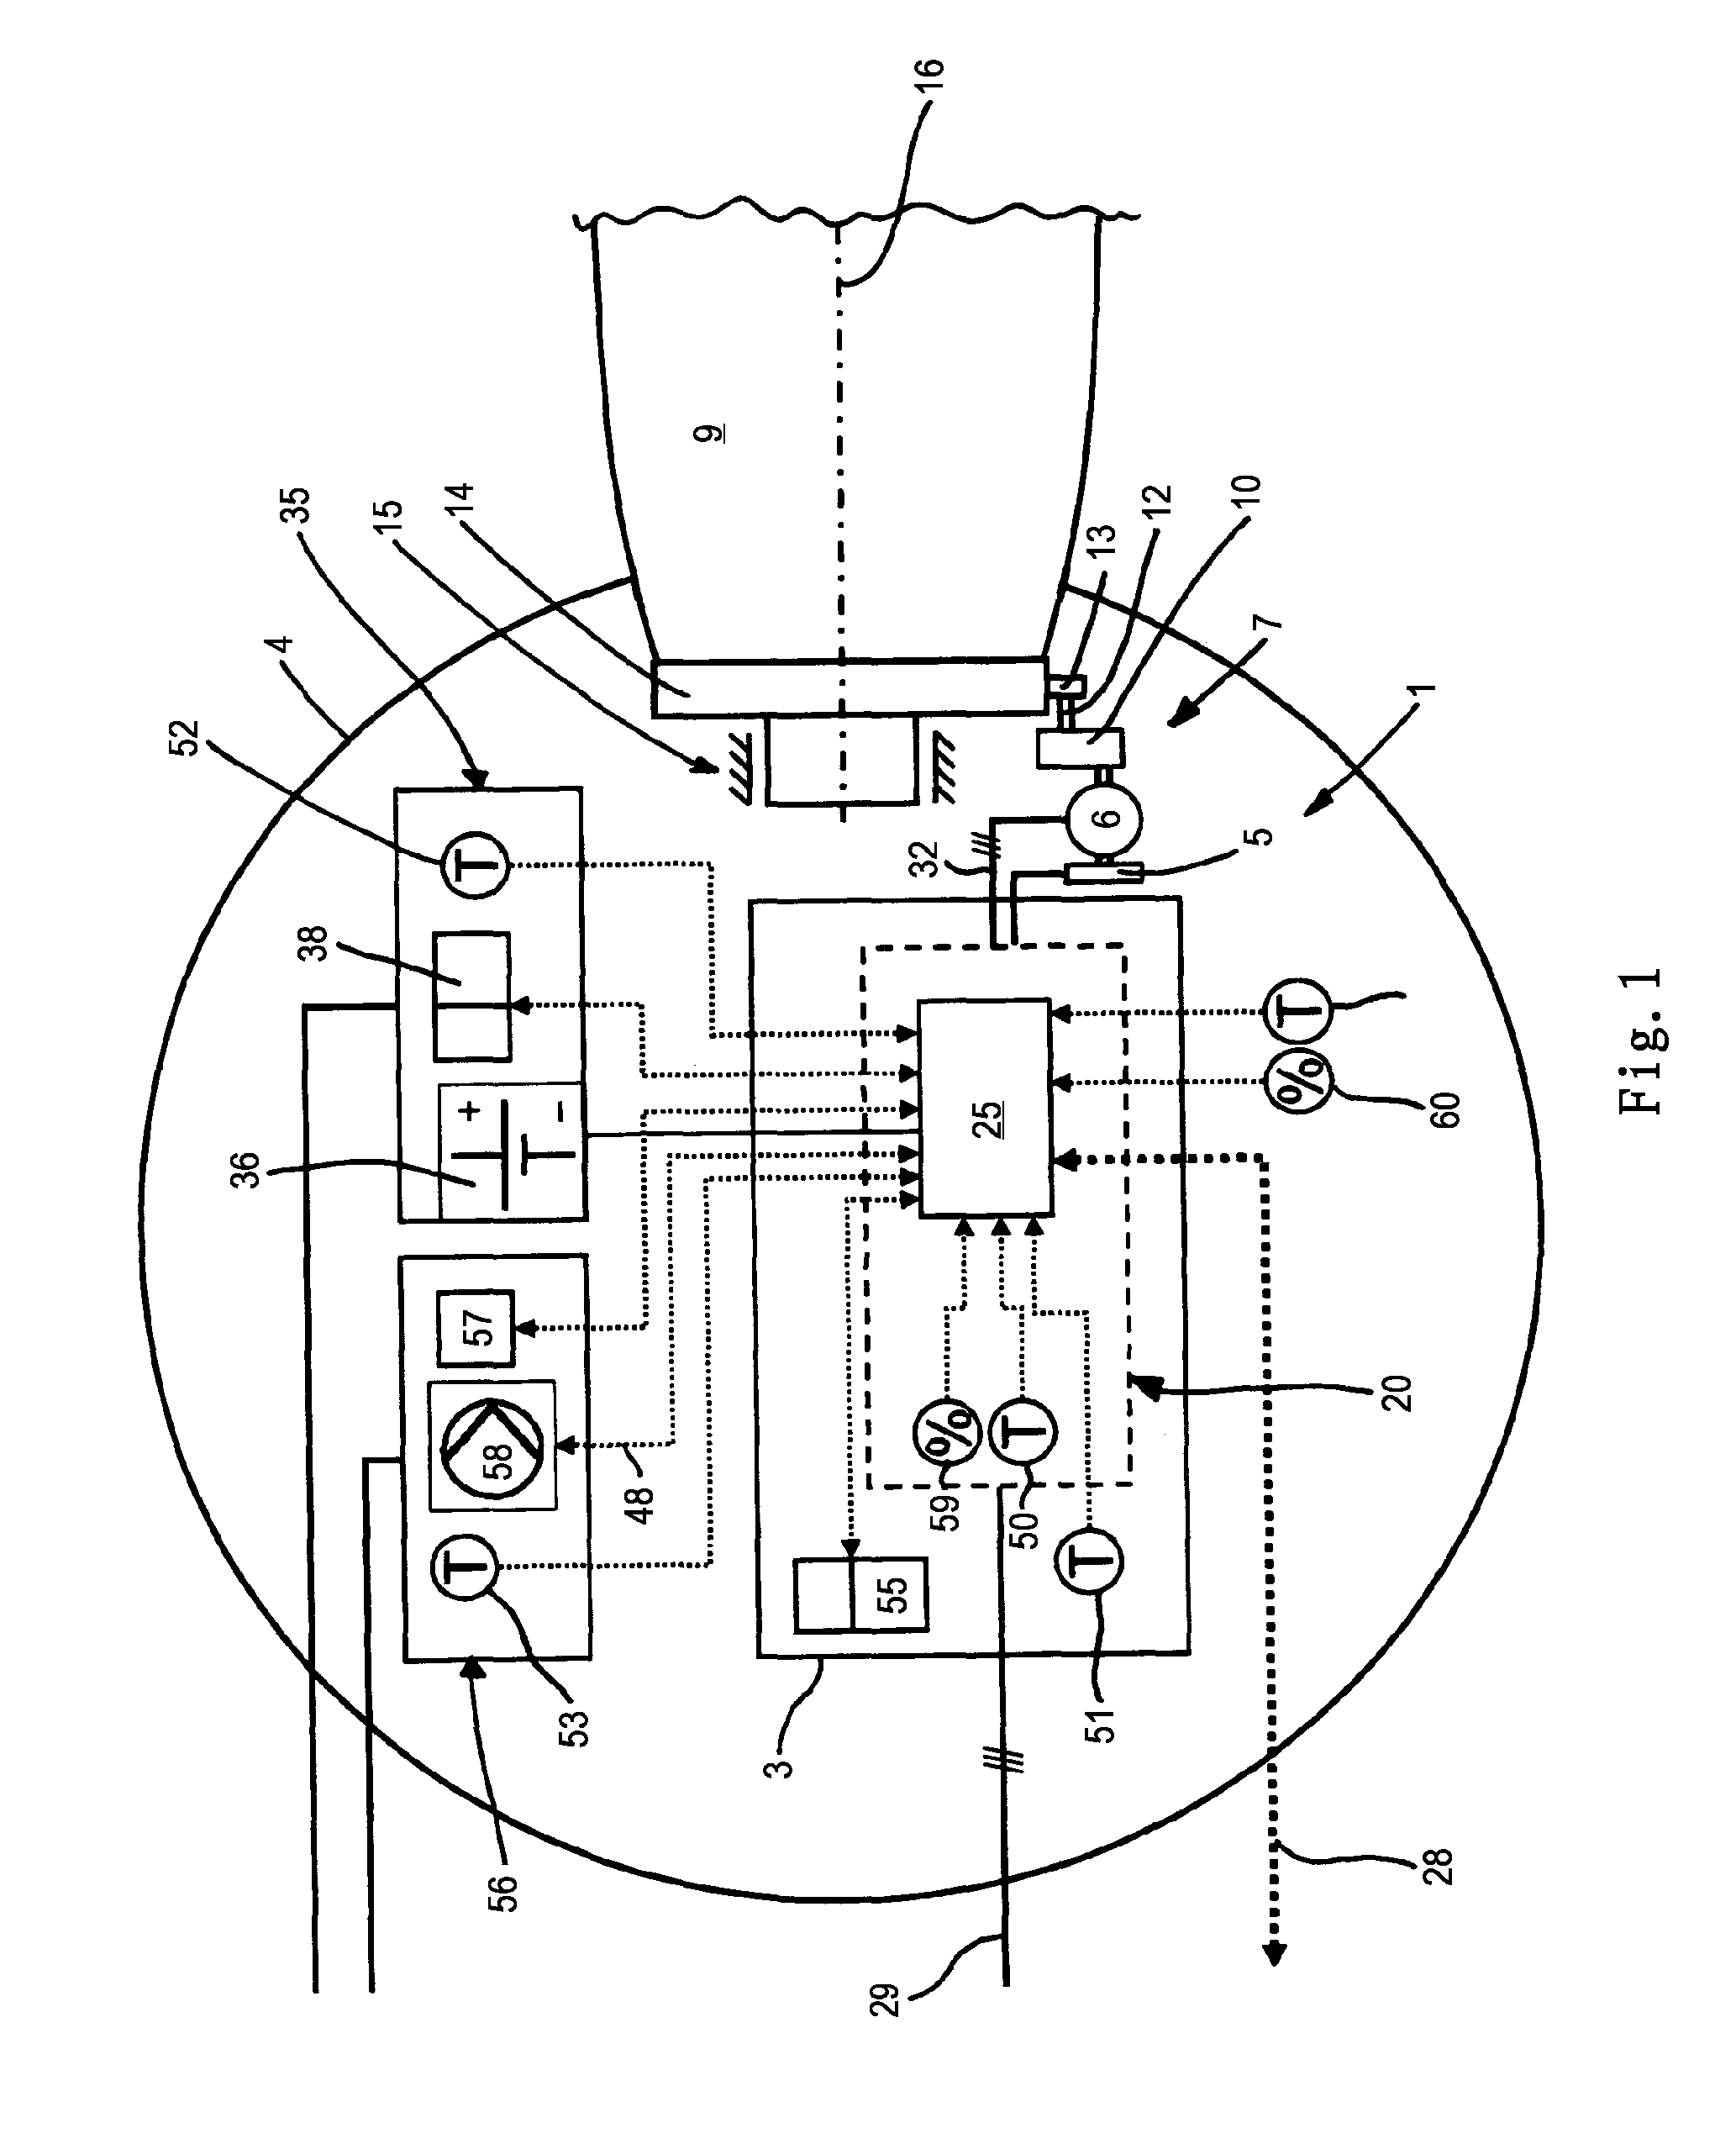 Drive device for a wind turbine